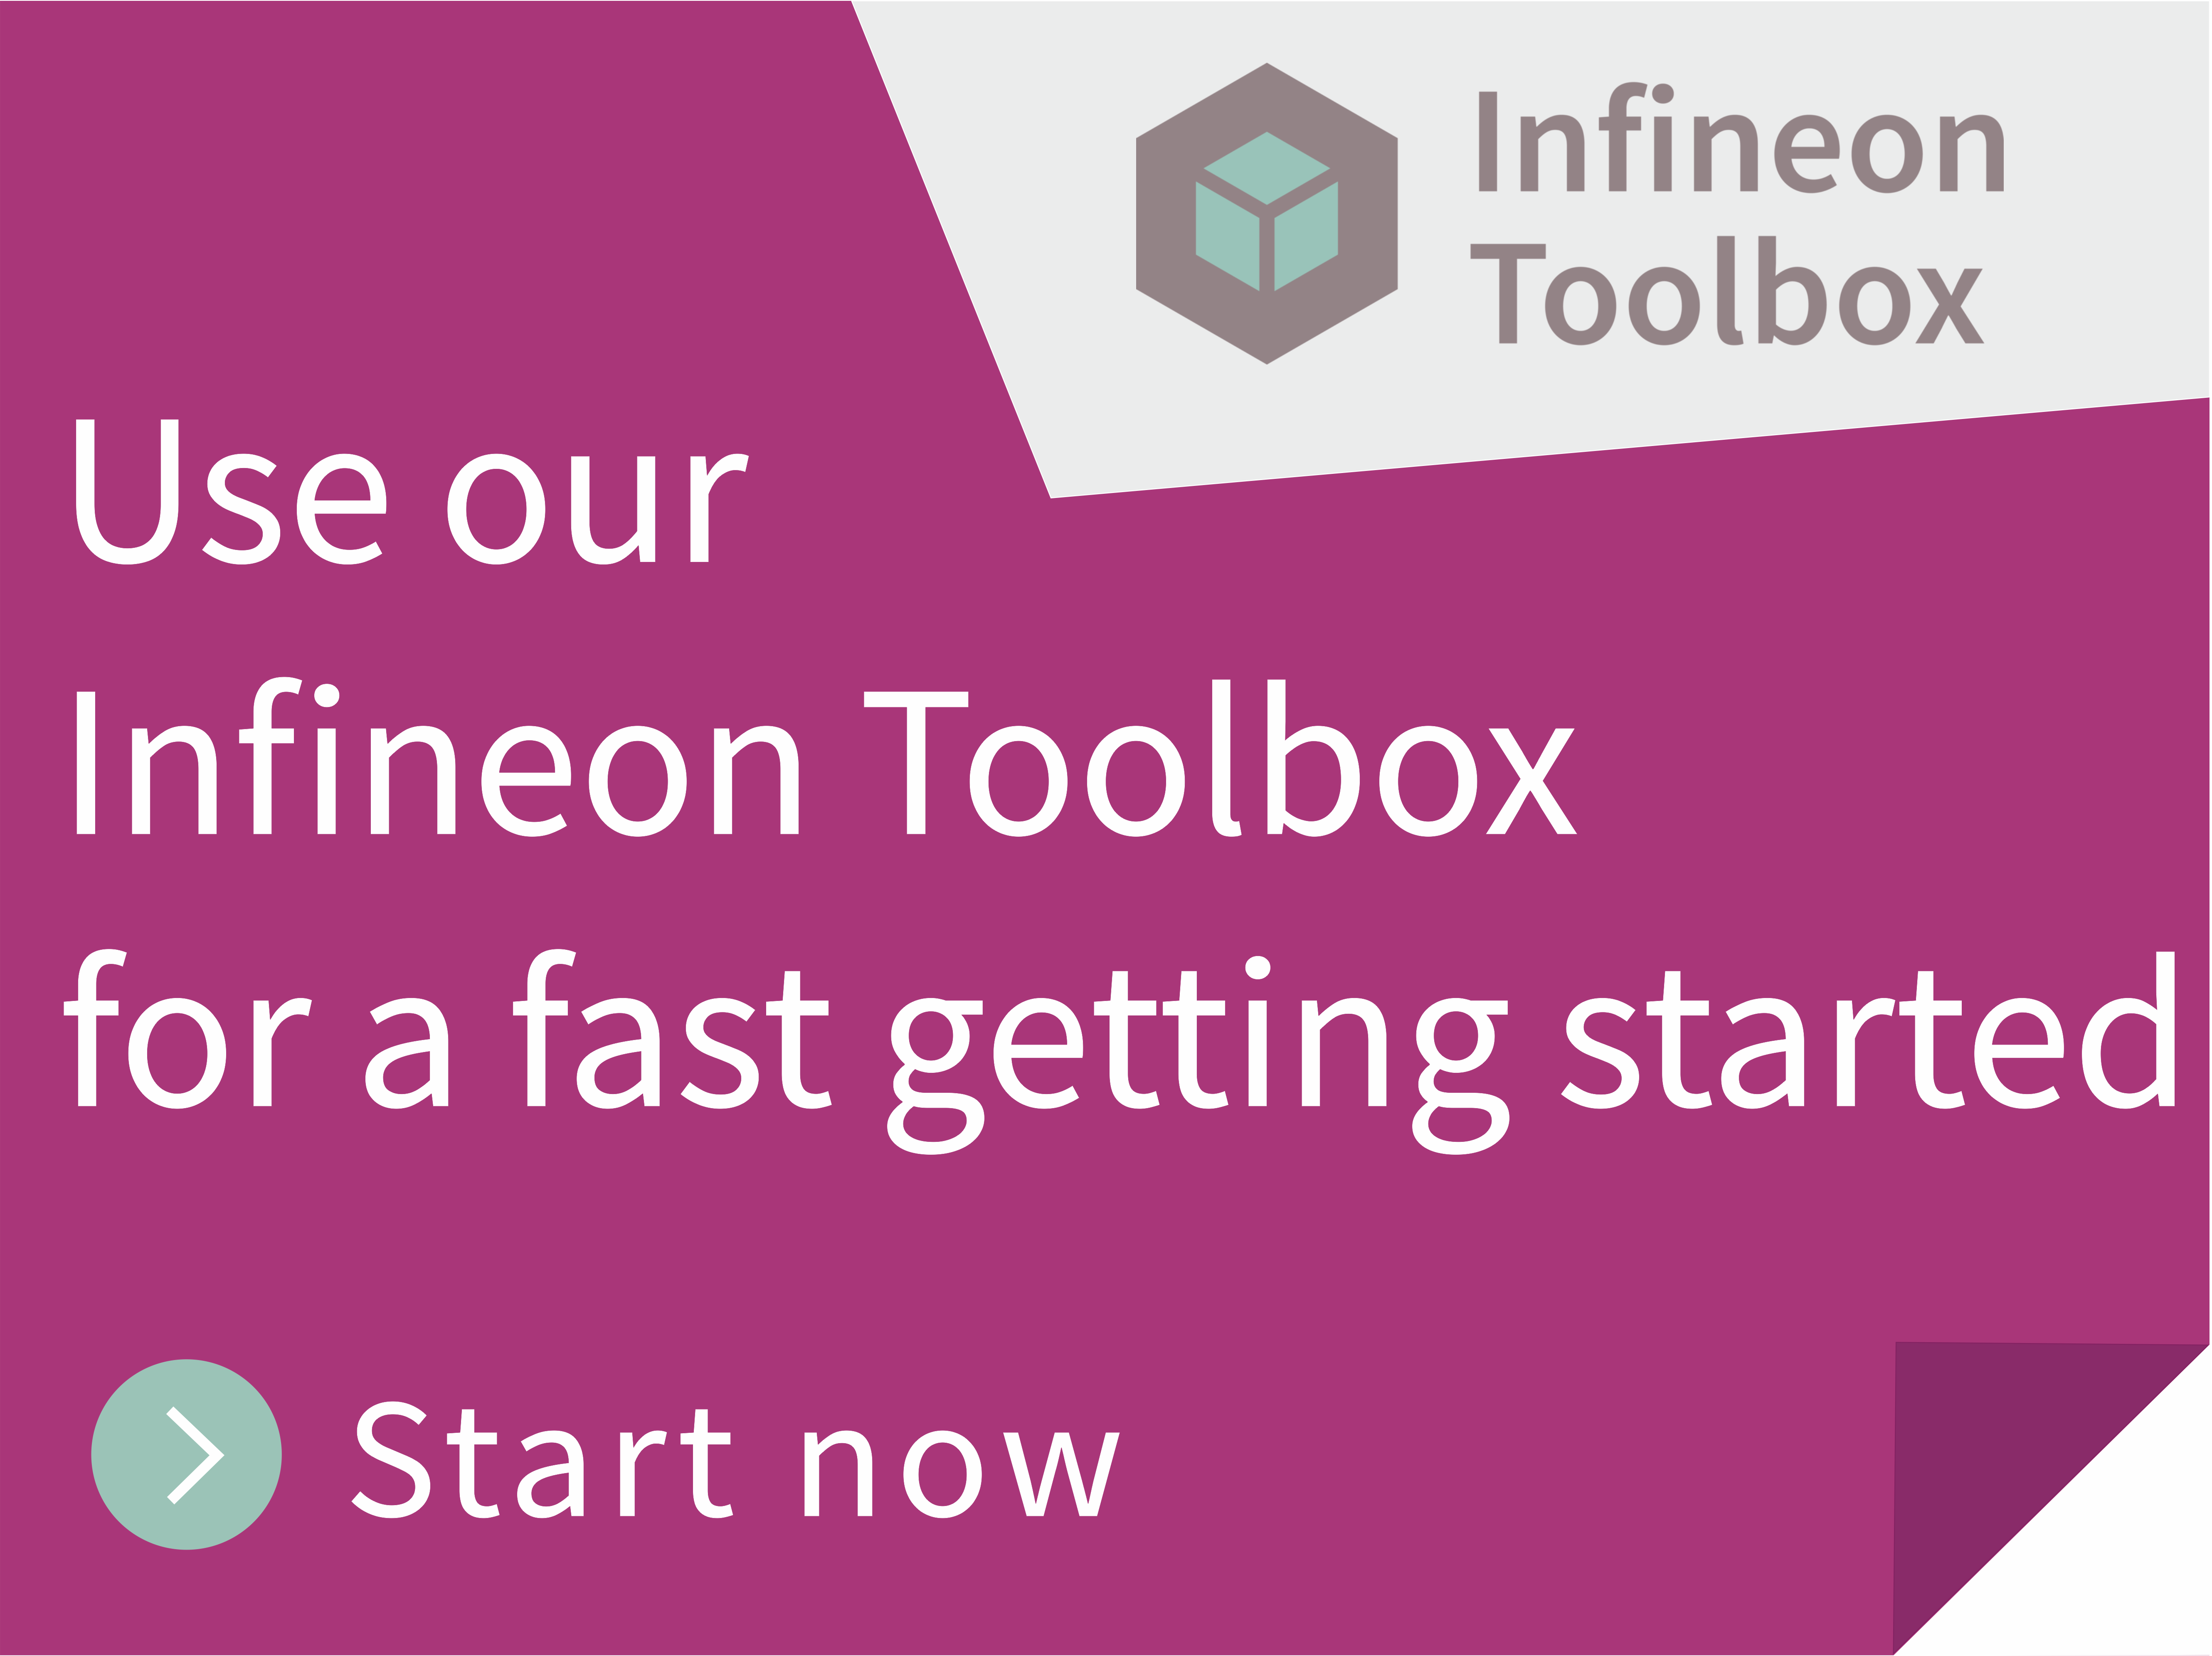 Get started with Infineon Toolbox